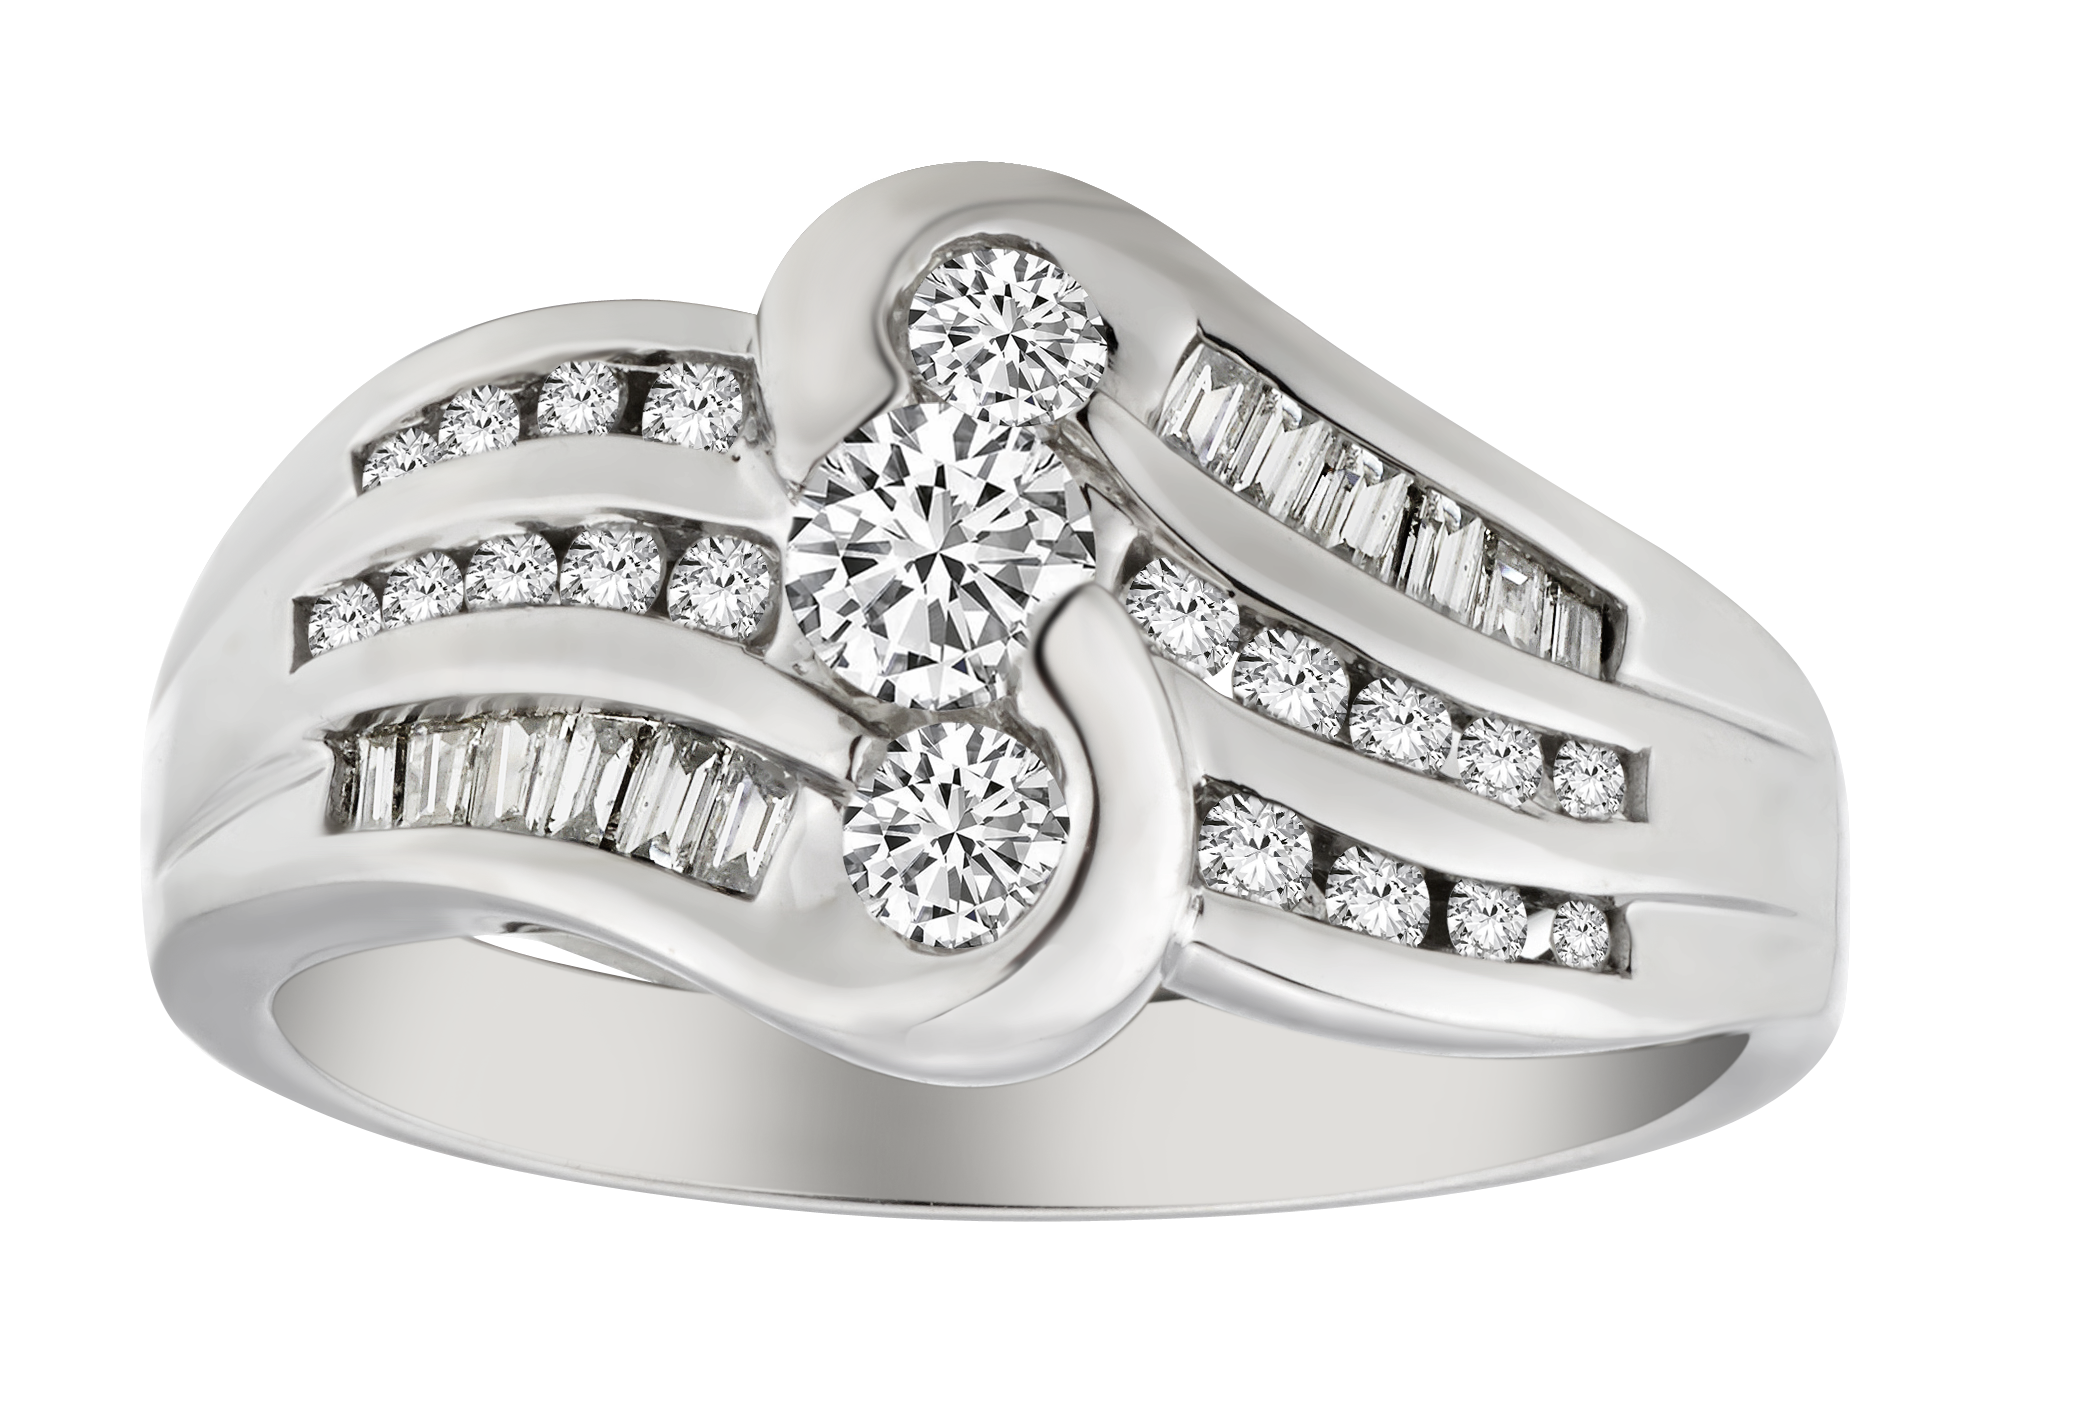 .75 Carat of Diamonds "Past, Present, Future" Ring, 14kt White Gold.....................NOW